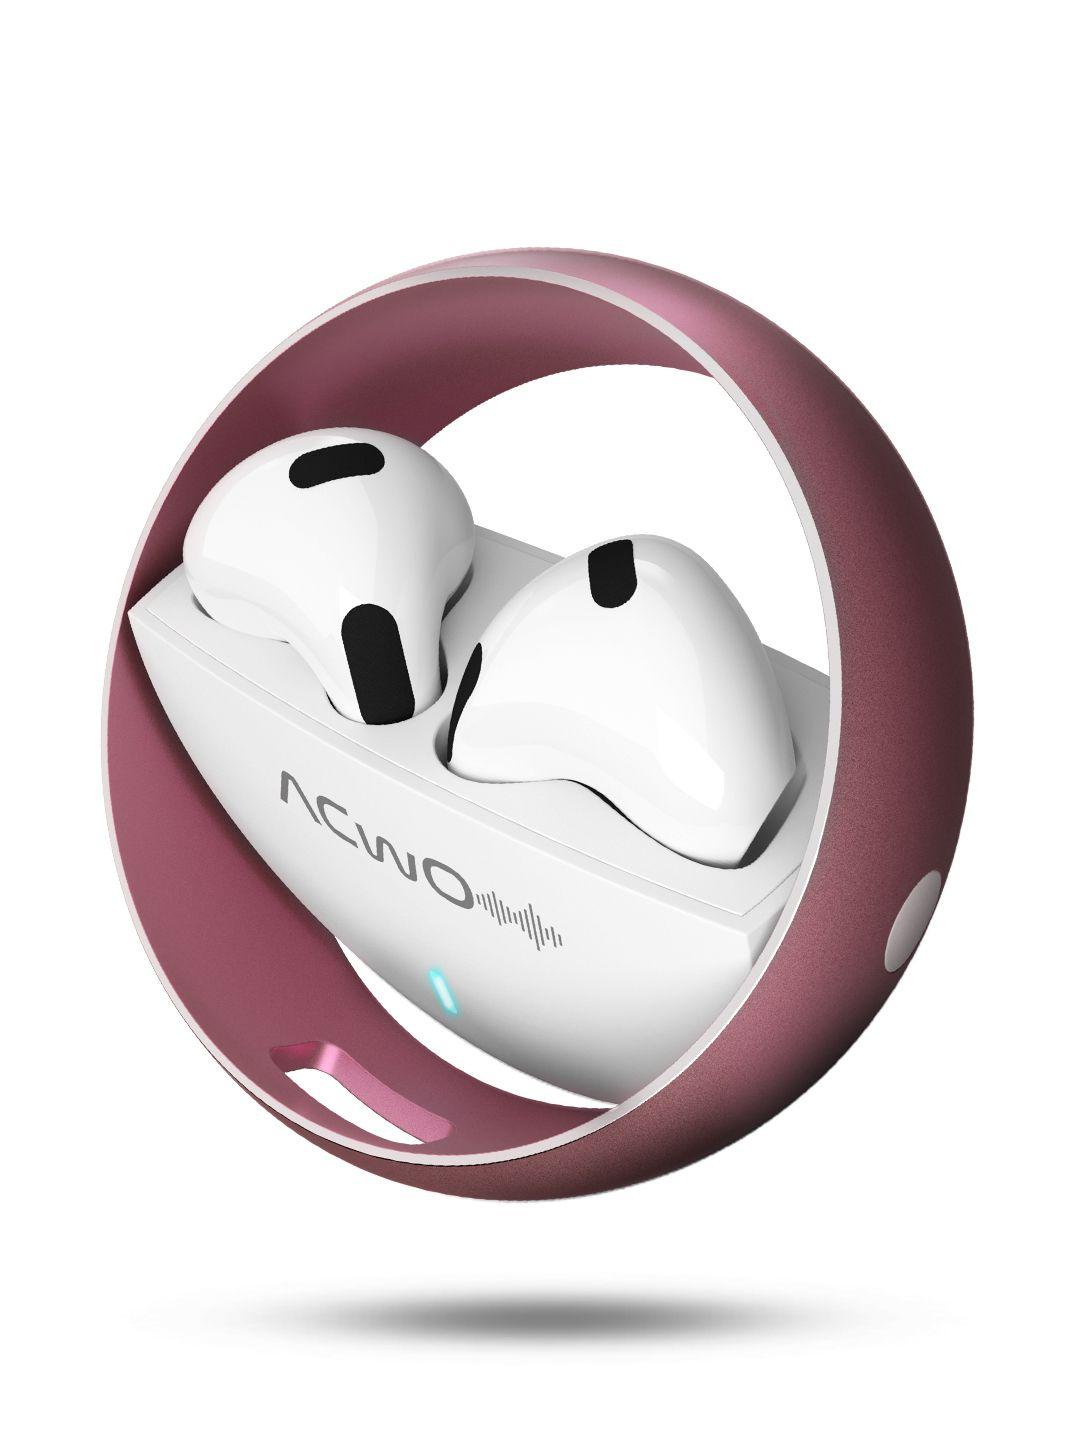 acwo dwots muze rotating design wireless earbud with noise cancellation & 30h playtime